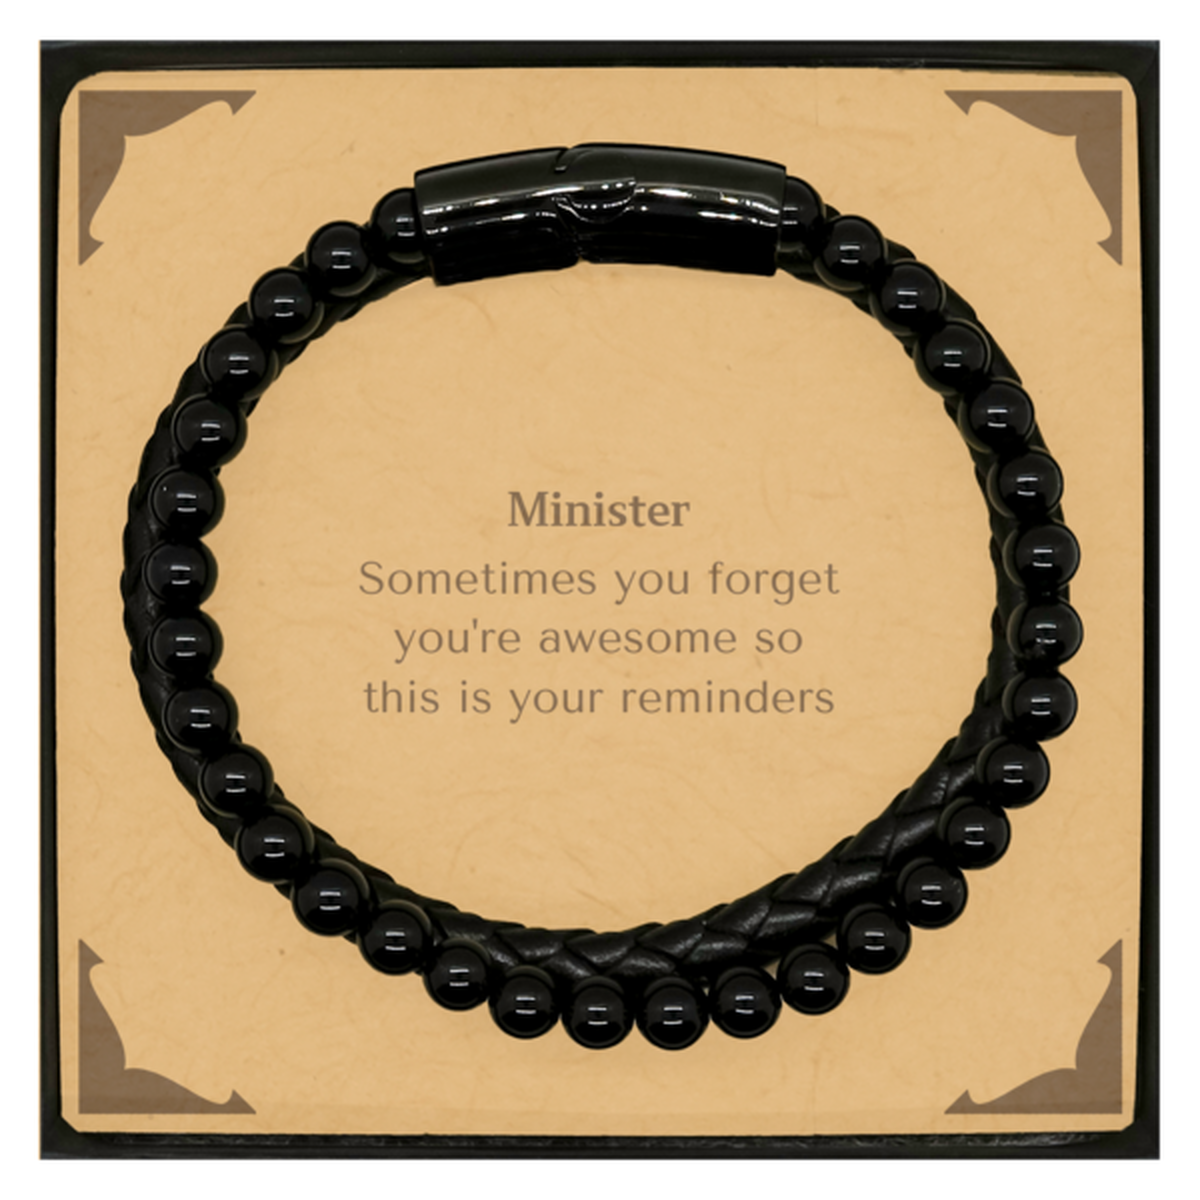 Sentimental Minister Stone Leather Bracelets, Minister Sometimes you forget you're awesome so this is your reminders, Graduation Christmas Birthday Gifts for Minister, Men, Women, Coworkers